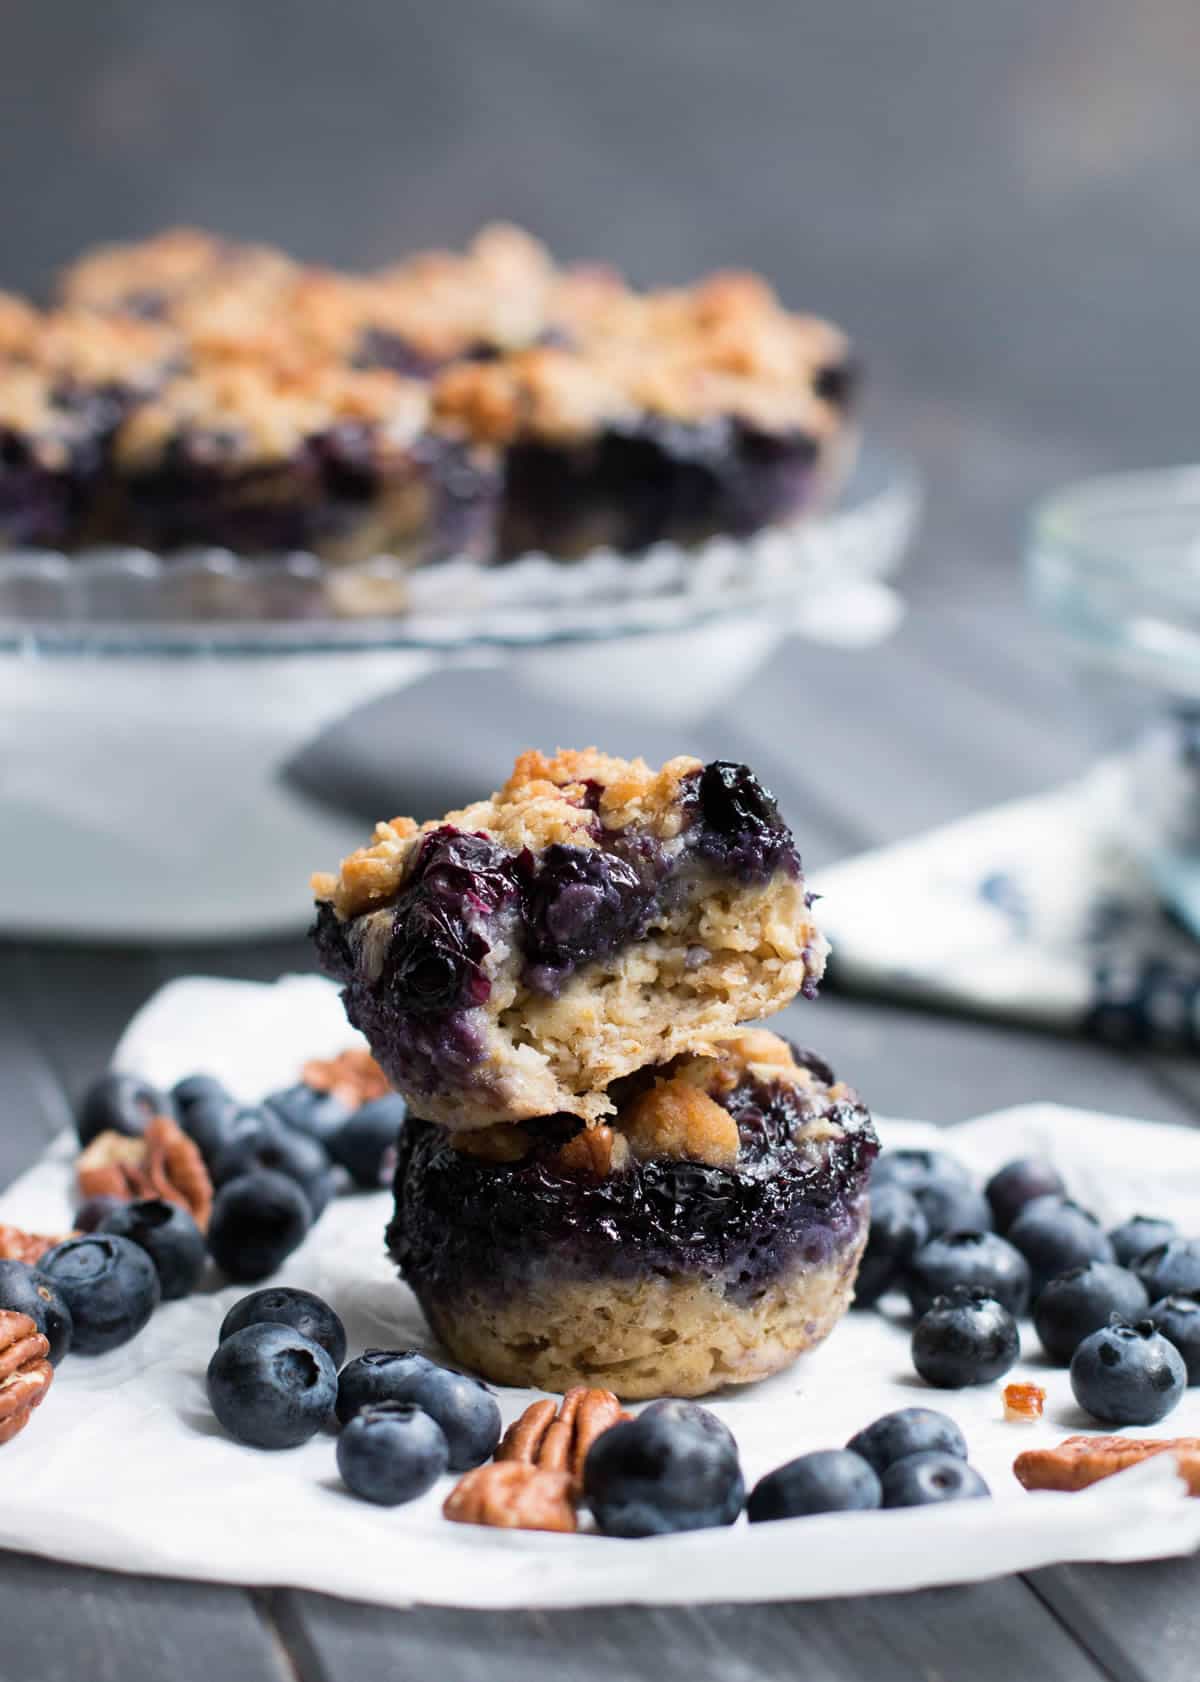 Make Ahead Breakfast Recipes. Blueberry Pie Baked Oatmeal. A pile of fresh blueberries and buttery crumb topping create a delicious fruity pie layer on top of hearty baked oatmeal.